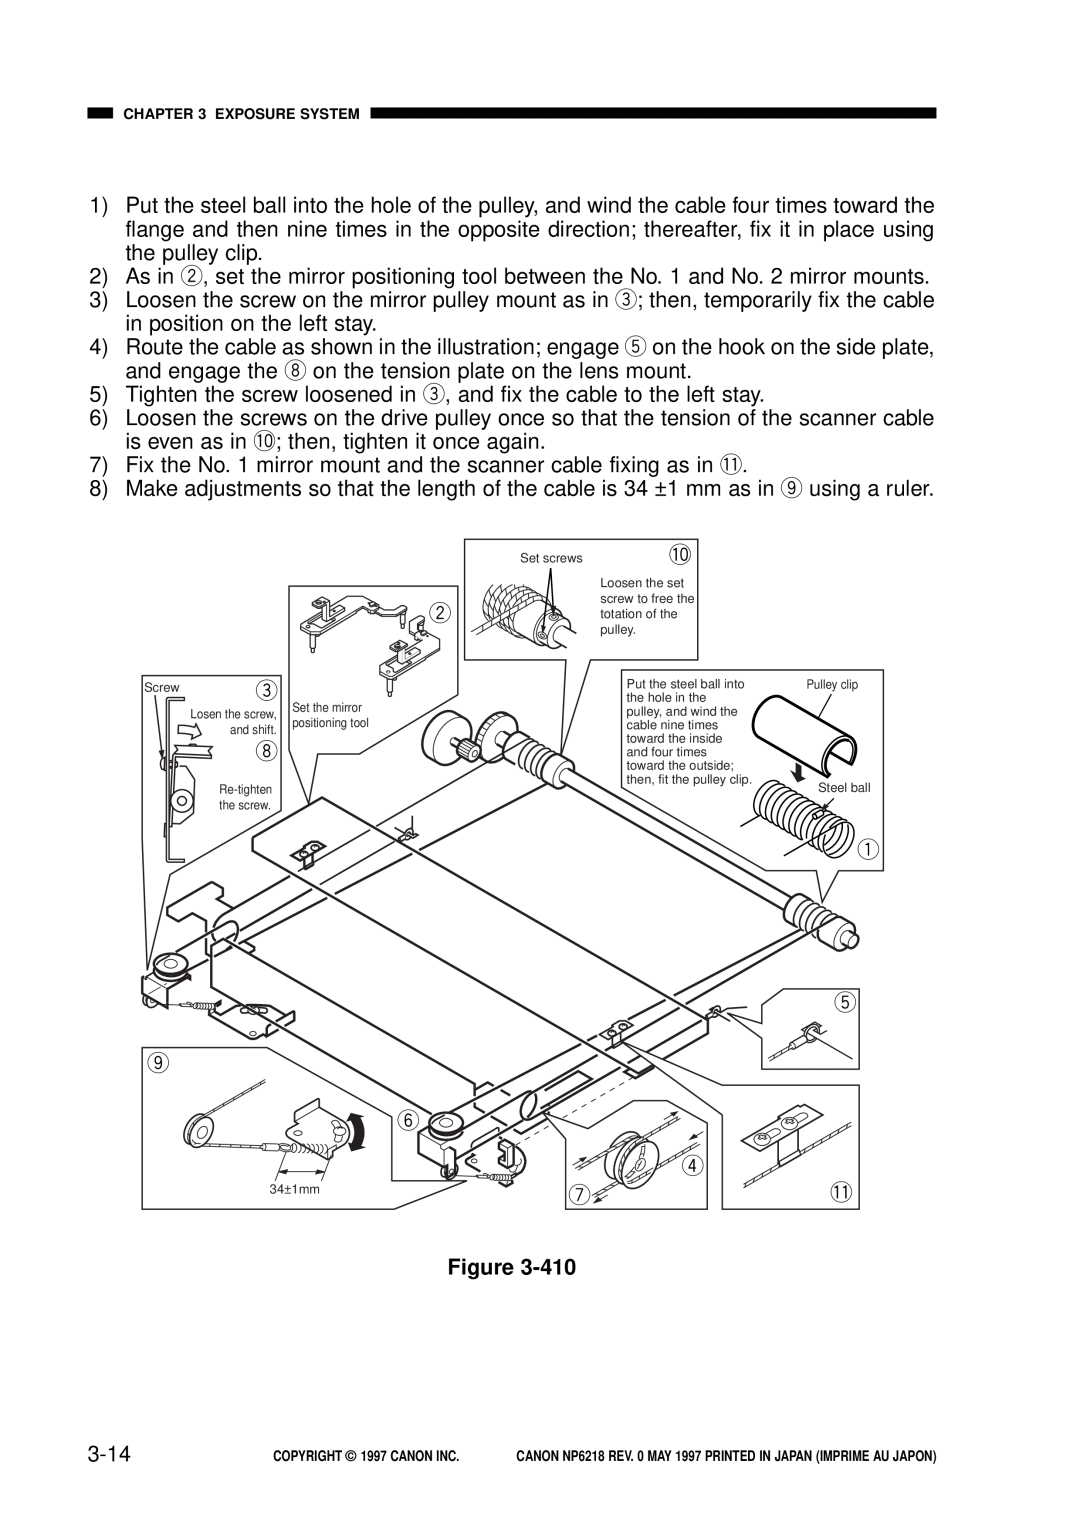 Canon FY8-13EX-000, NP6218 service manual 3-14, Tighten the screw loosened in e, and fix the cable to the left stay 